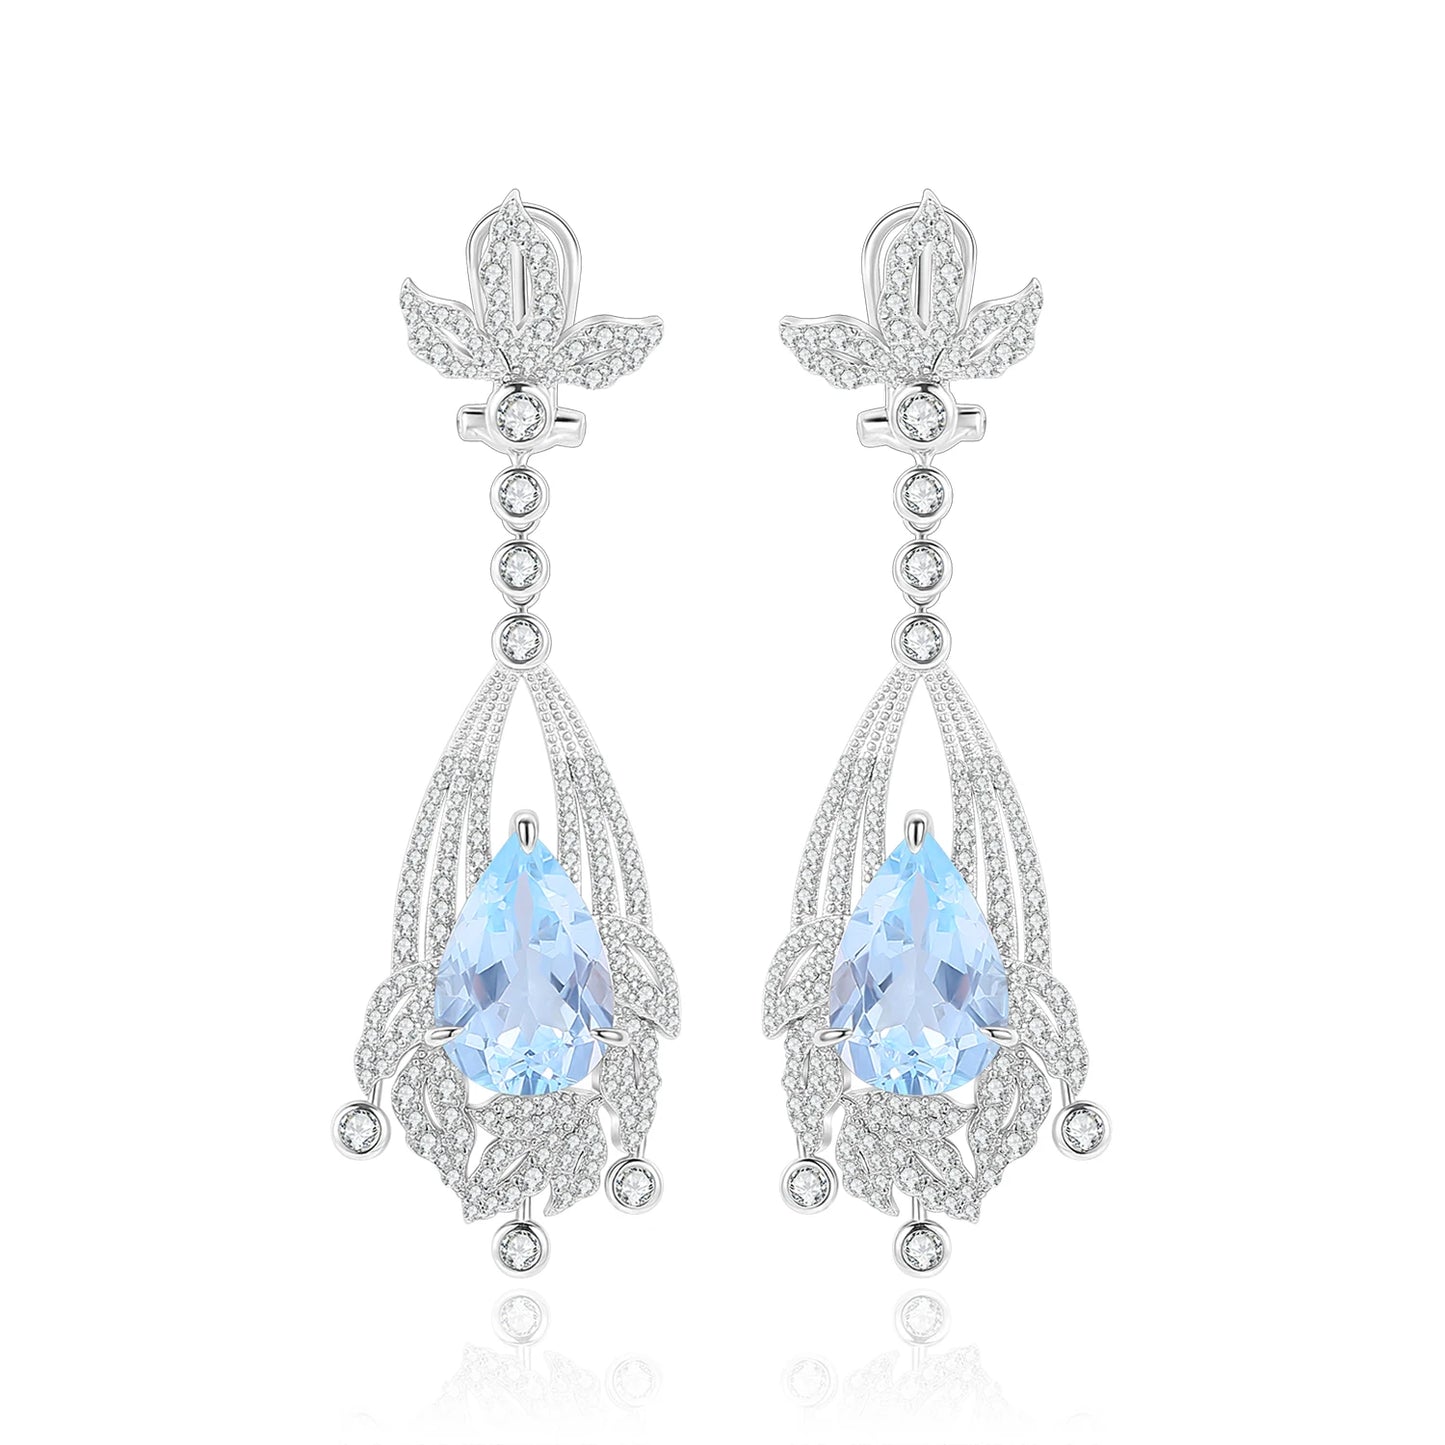 GEM'S BALLET Natural Amethyst Statement Earrings in 925 Sterling Silver Chandelier Earrings Luxury Bridal Jewelry Gift For Her Sky Blue Topaz 925 Sterling Silver CHINA